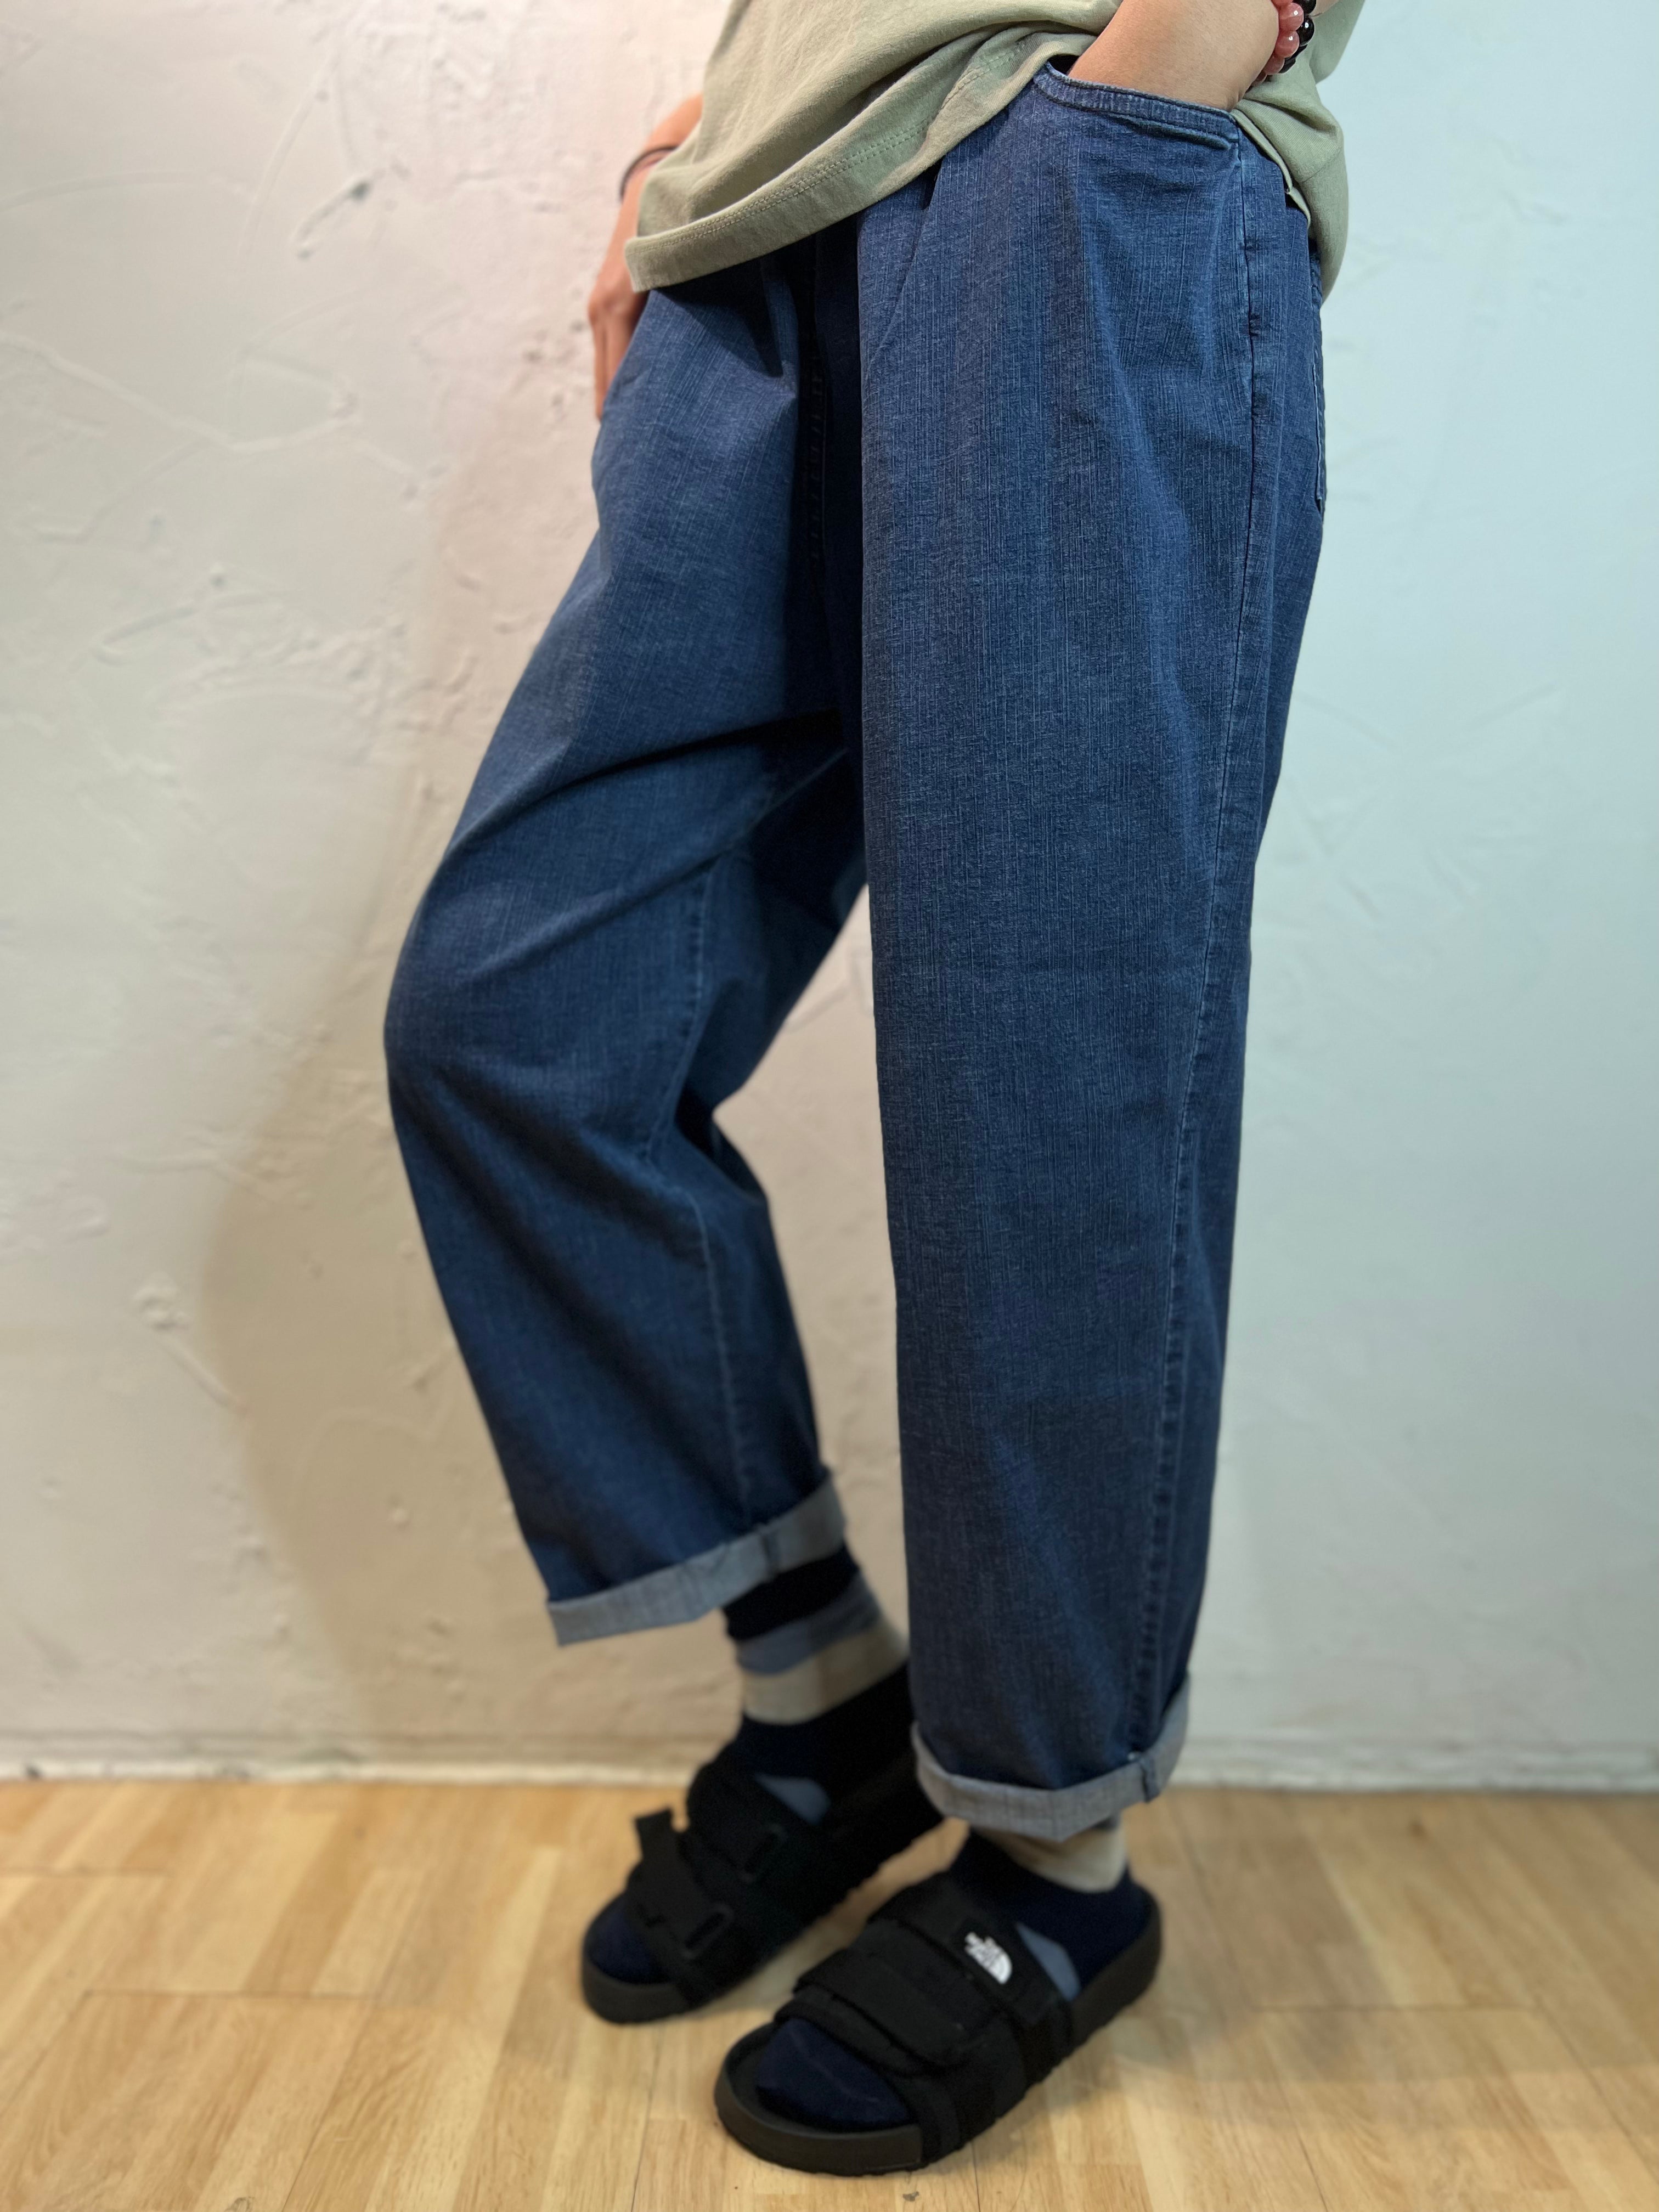 Hanging Legs Jeans